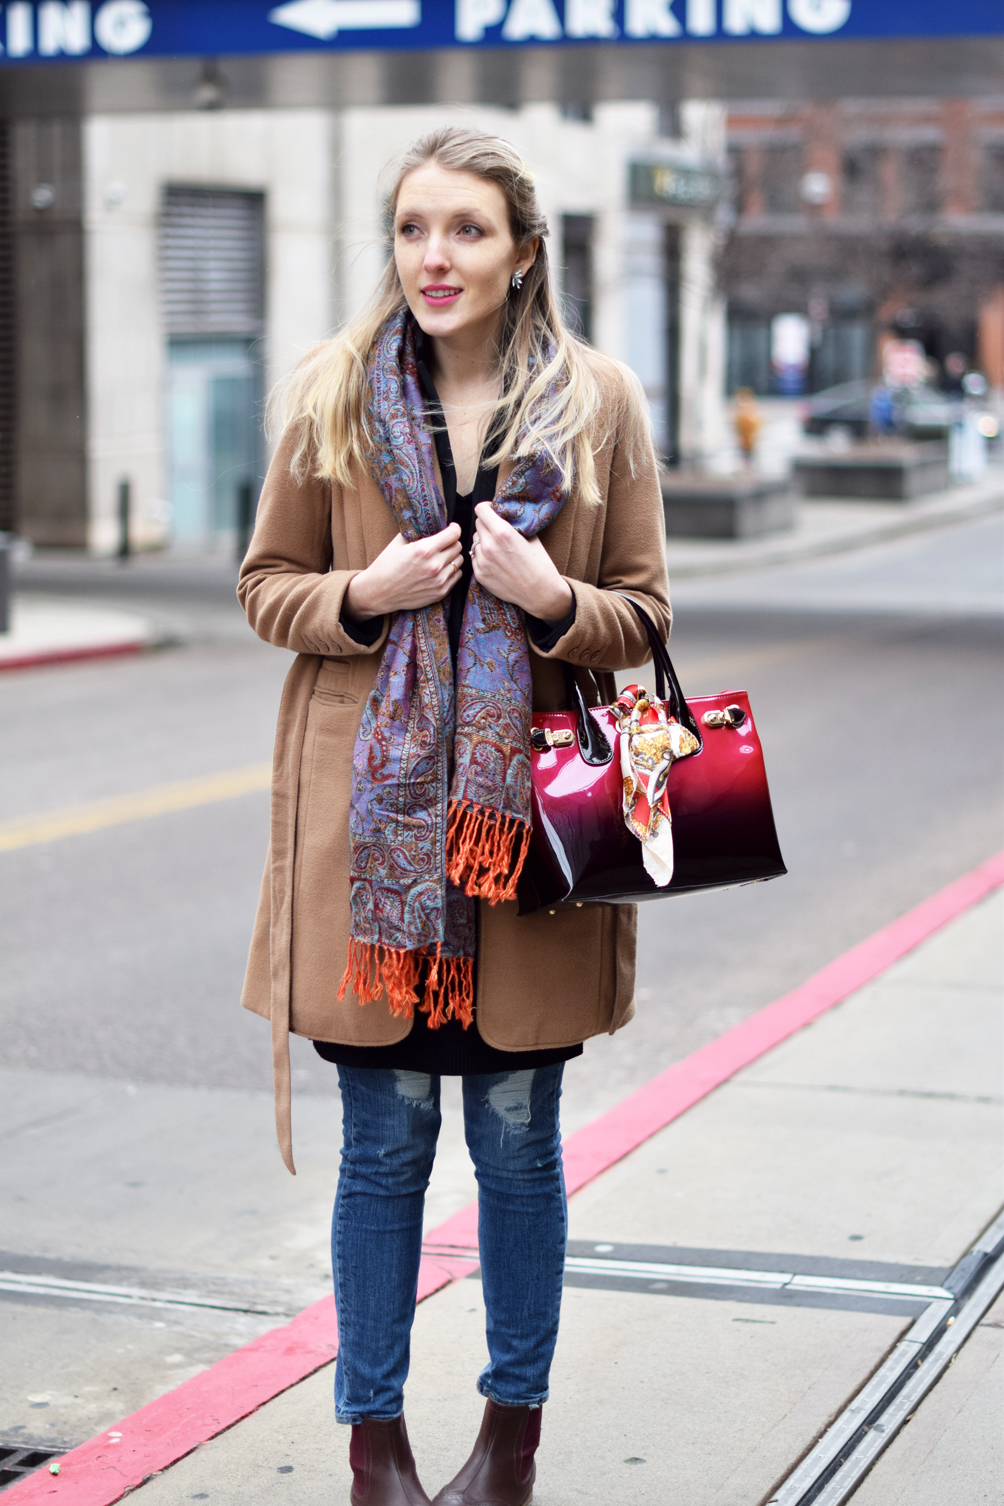 layered dress look for winter style - one brass fox